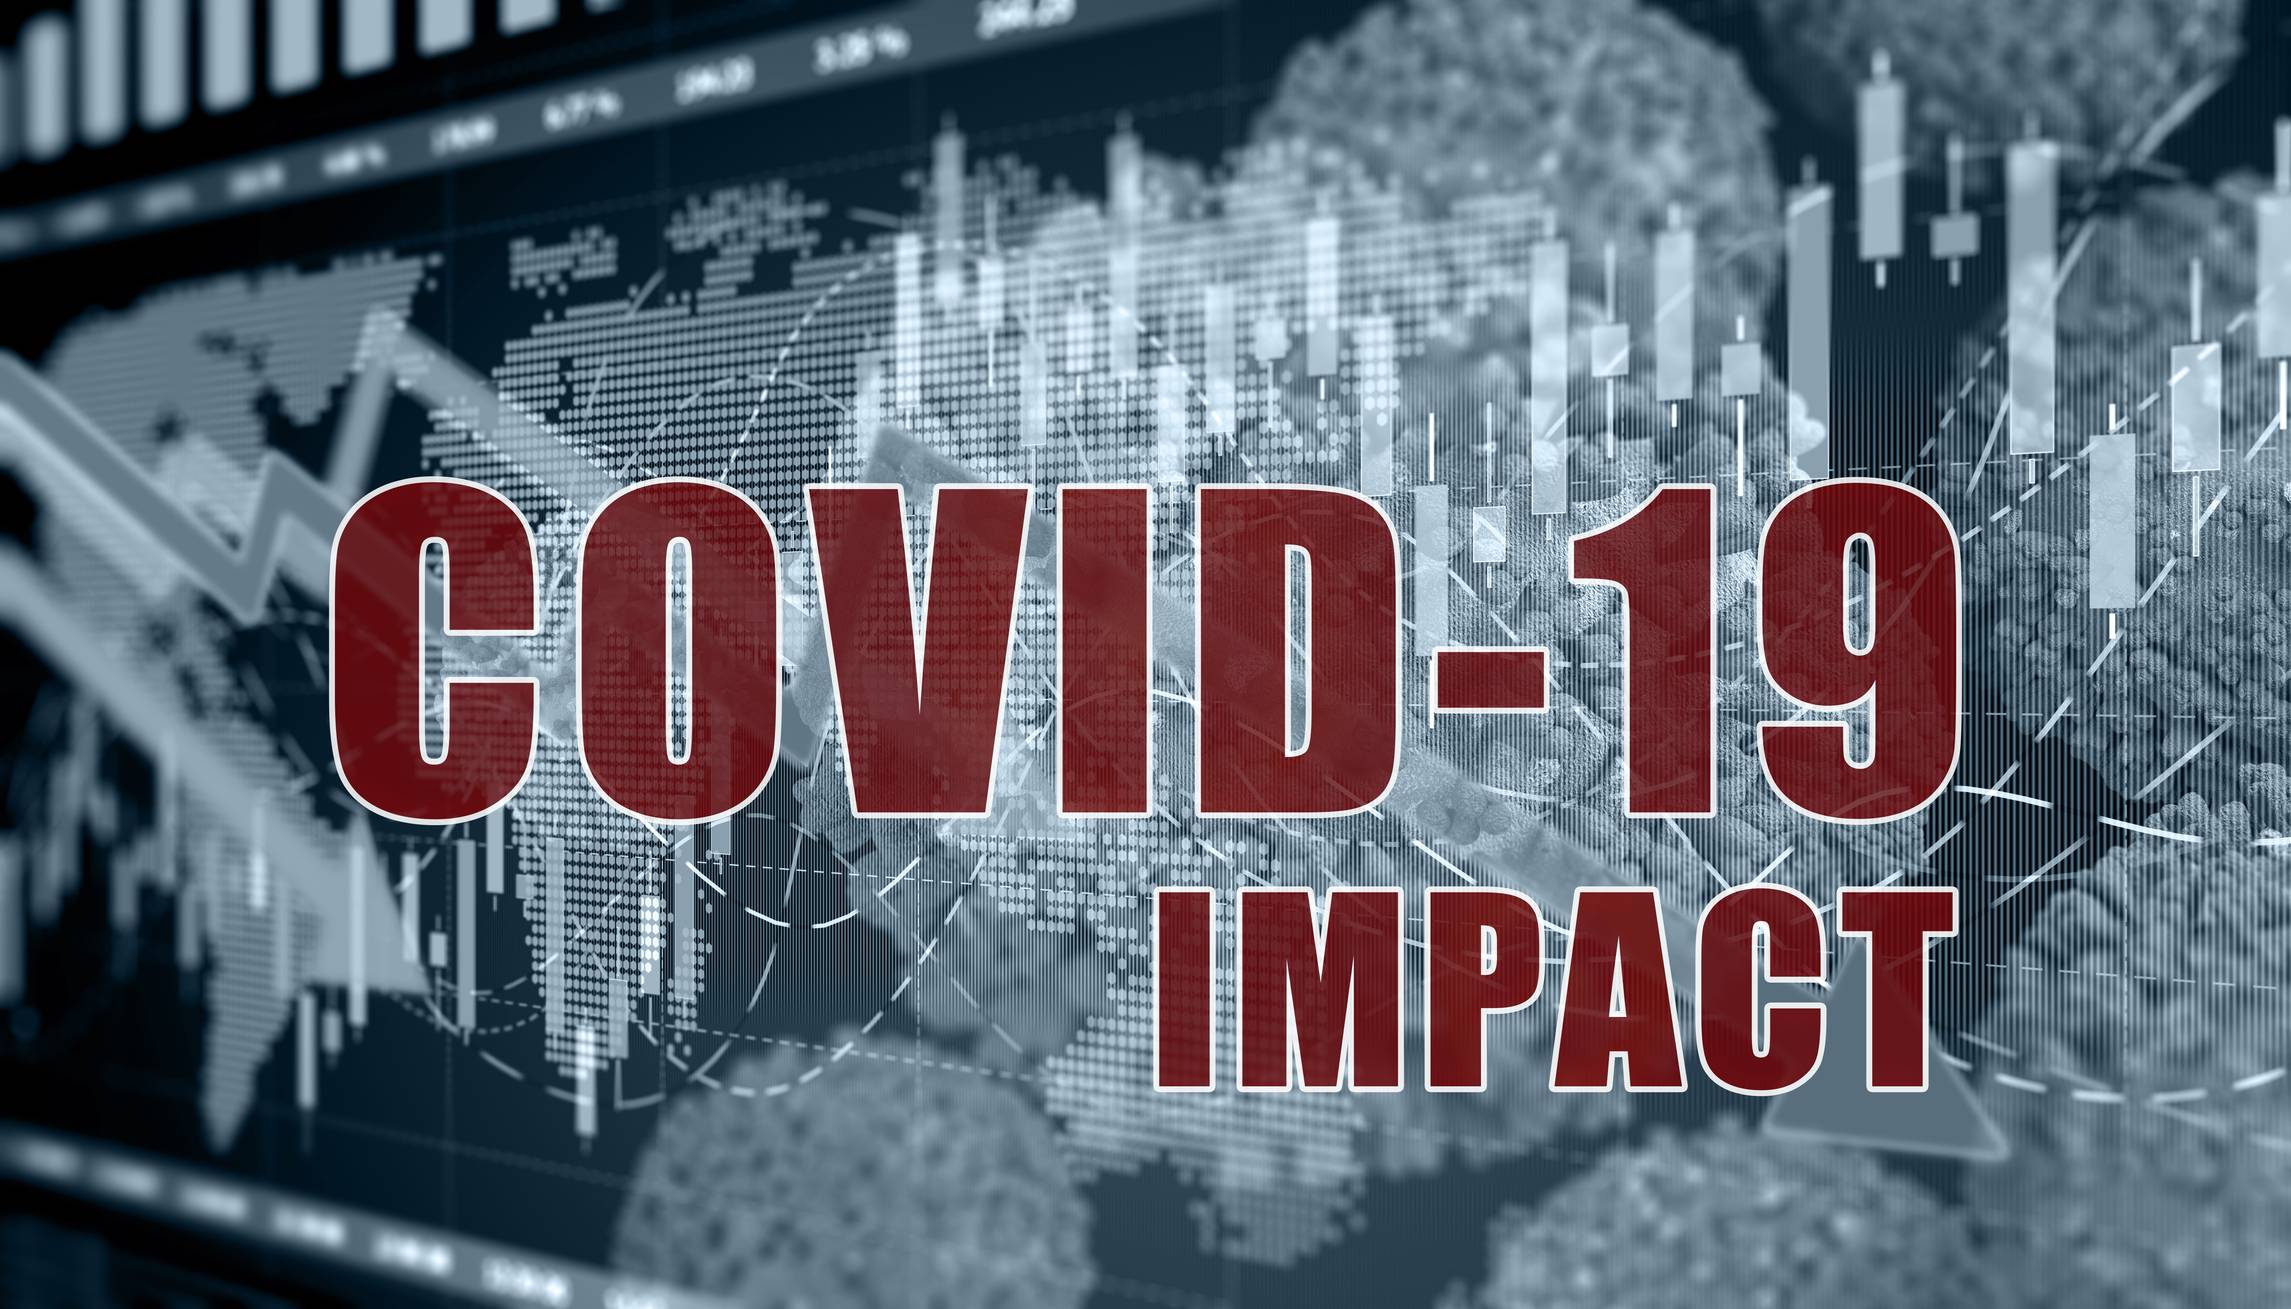 To support economies amid COVID-19, central banks worldwide are cutting interest rates and are expected to keep interest rates low. This has had an adverse impact on the Participating Fund of insurers which in turn will affect the guaranteed and non-guaranteed returns of your par policies.